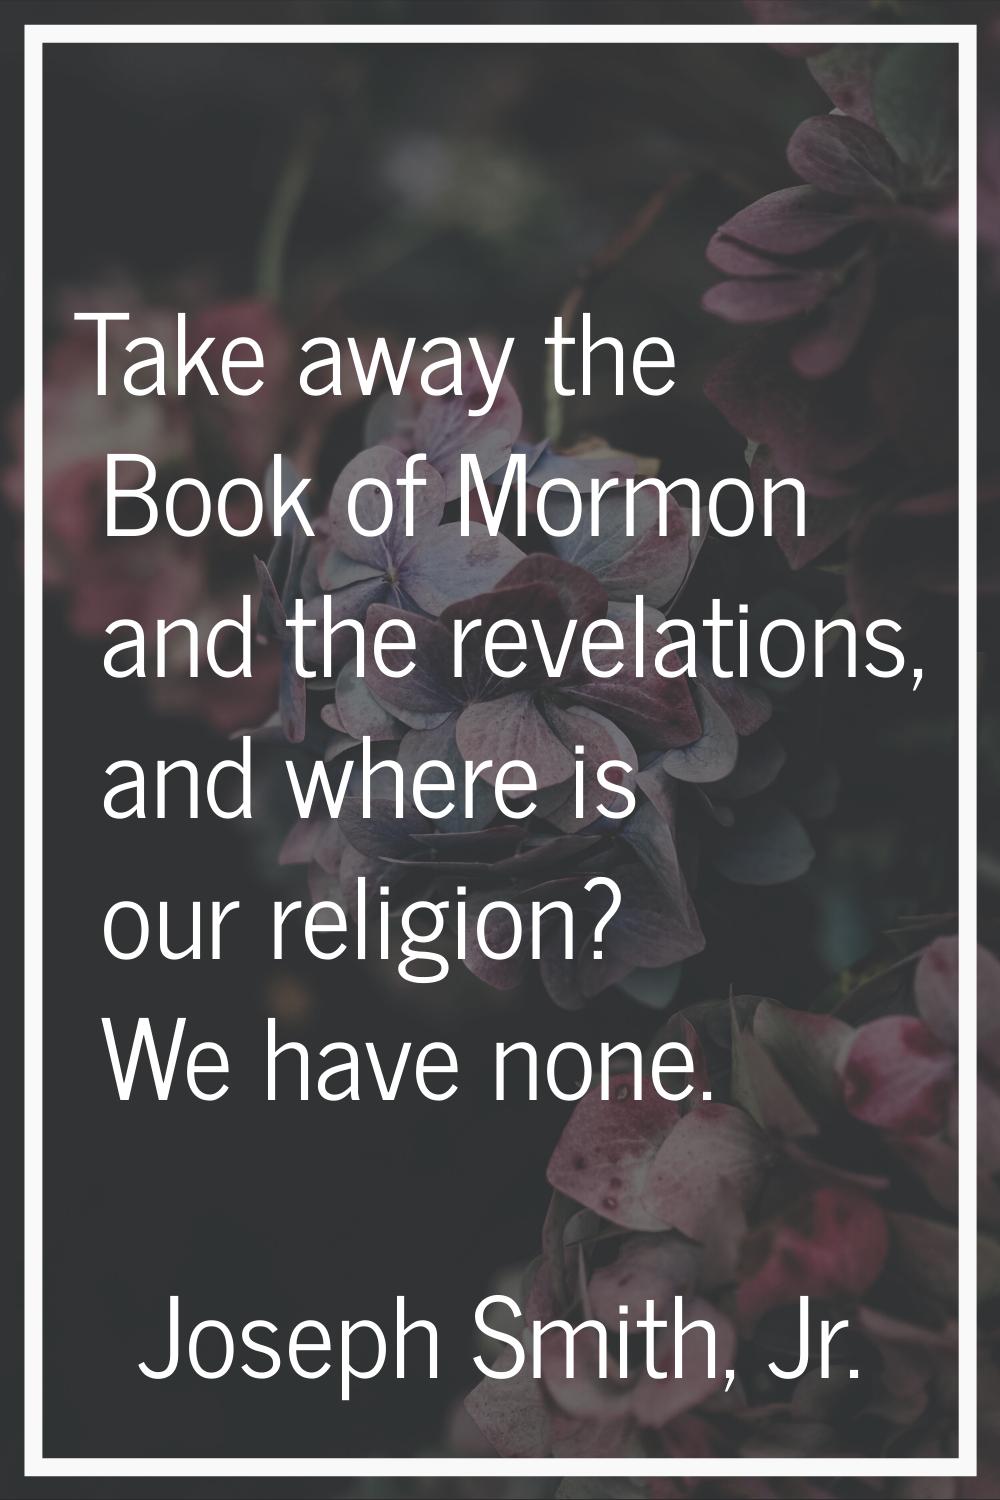 Take away the Book of Mormon and the revelations, and where is our religion? We have none.